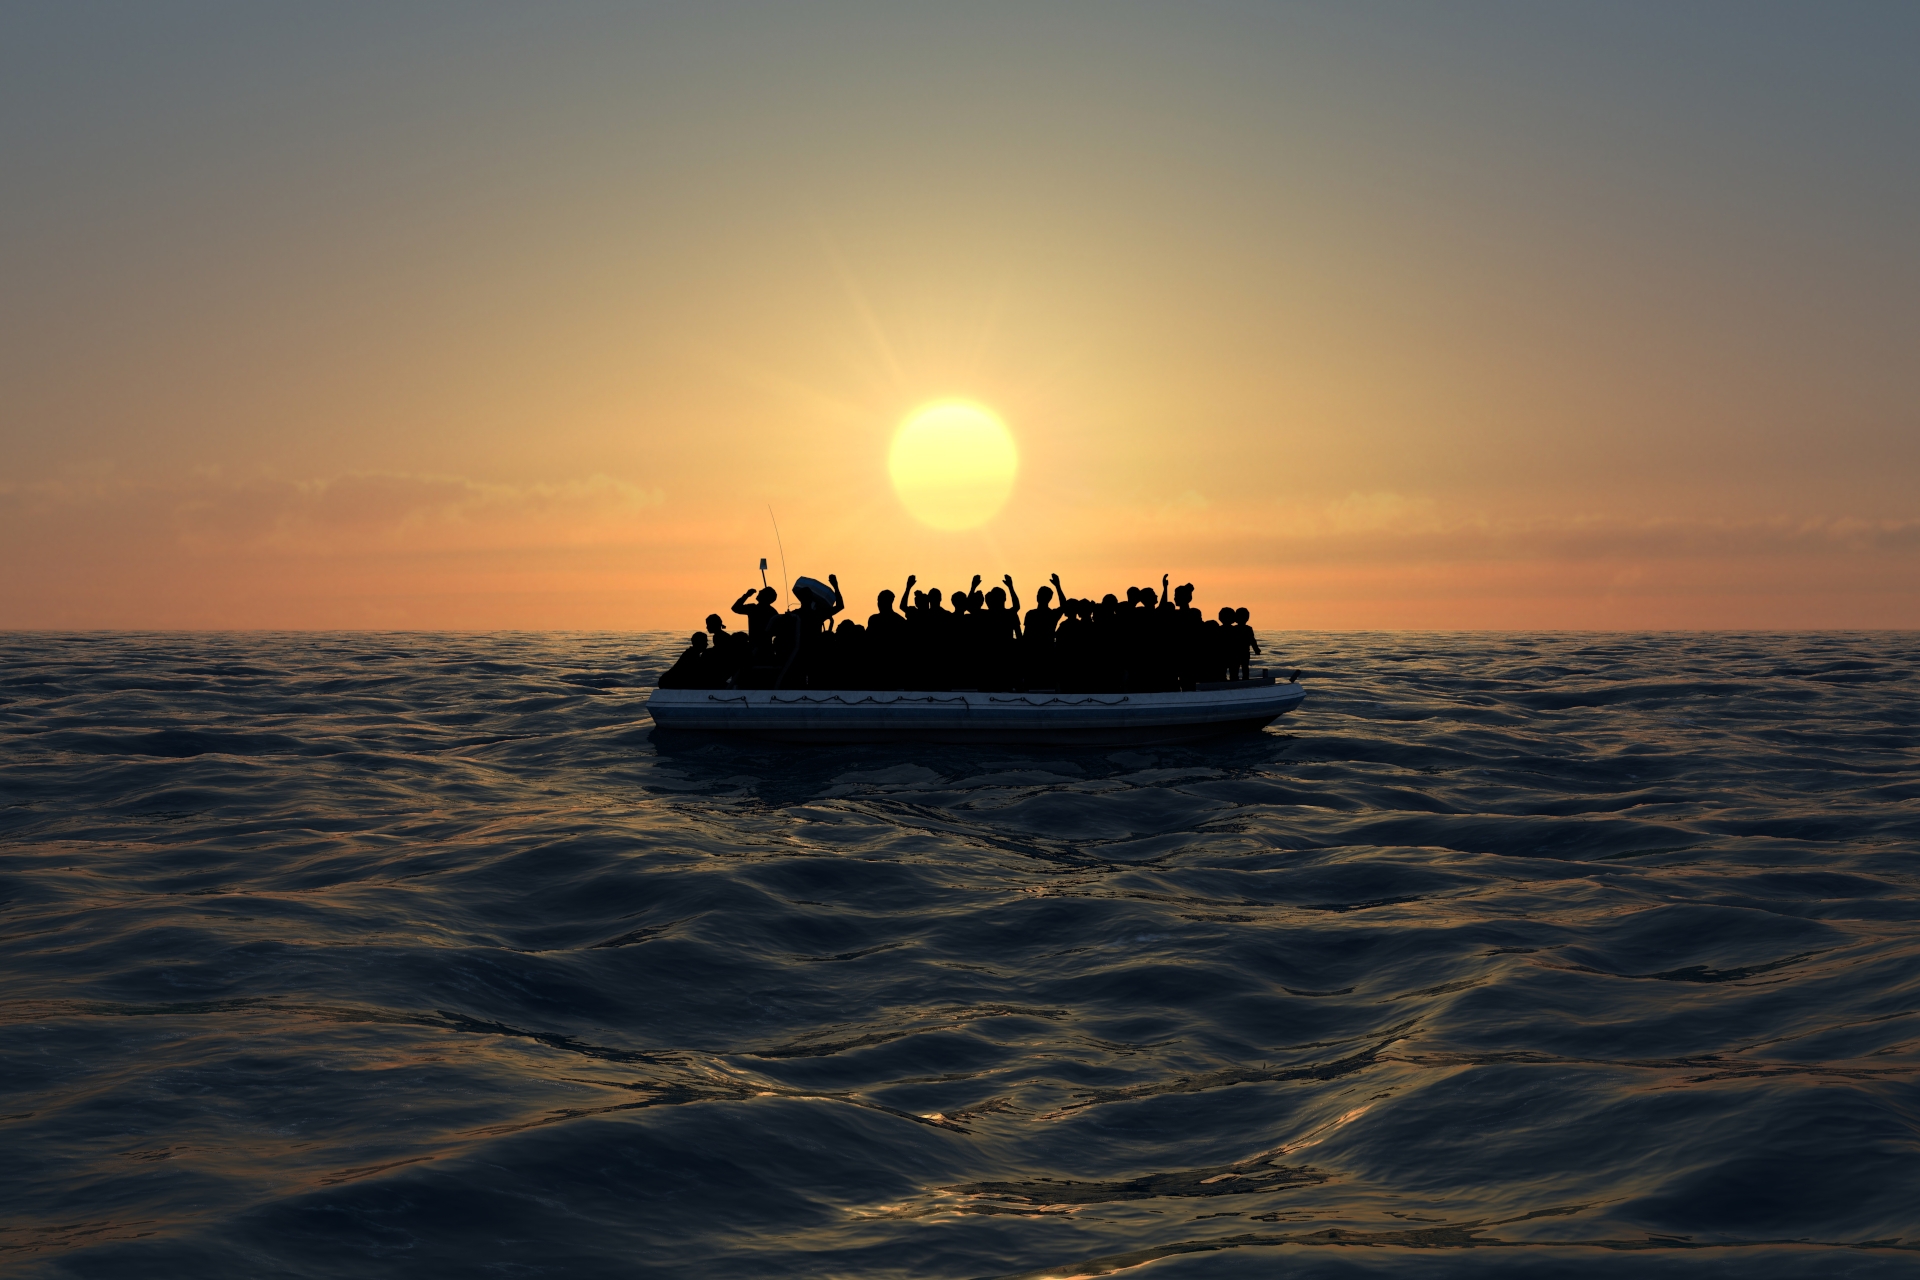 Refugees on a big rubber boat in the middle of the sea that require help